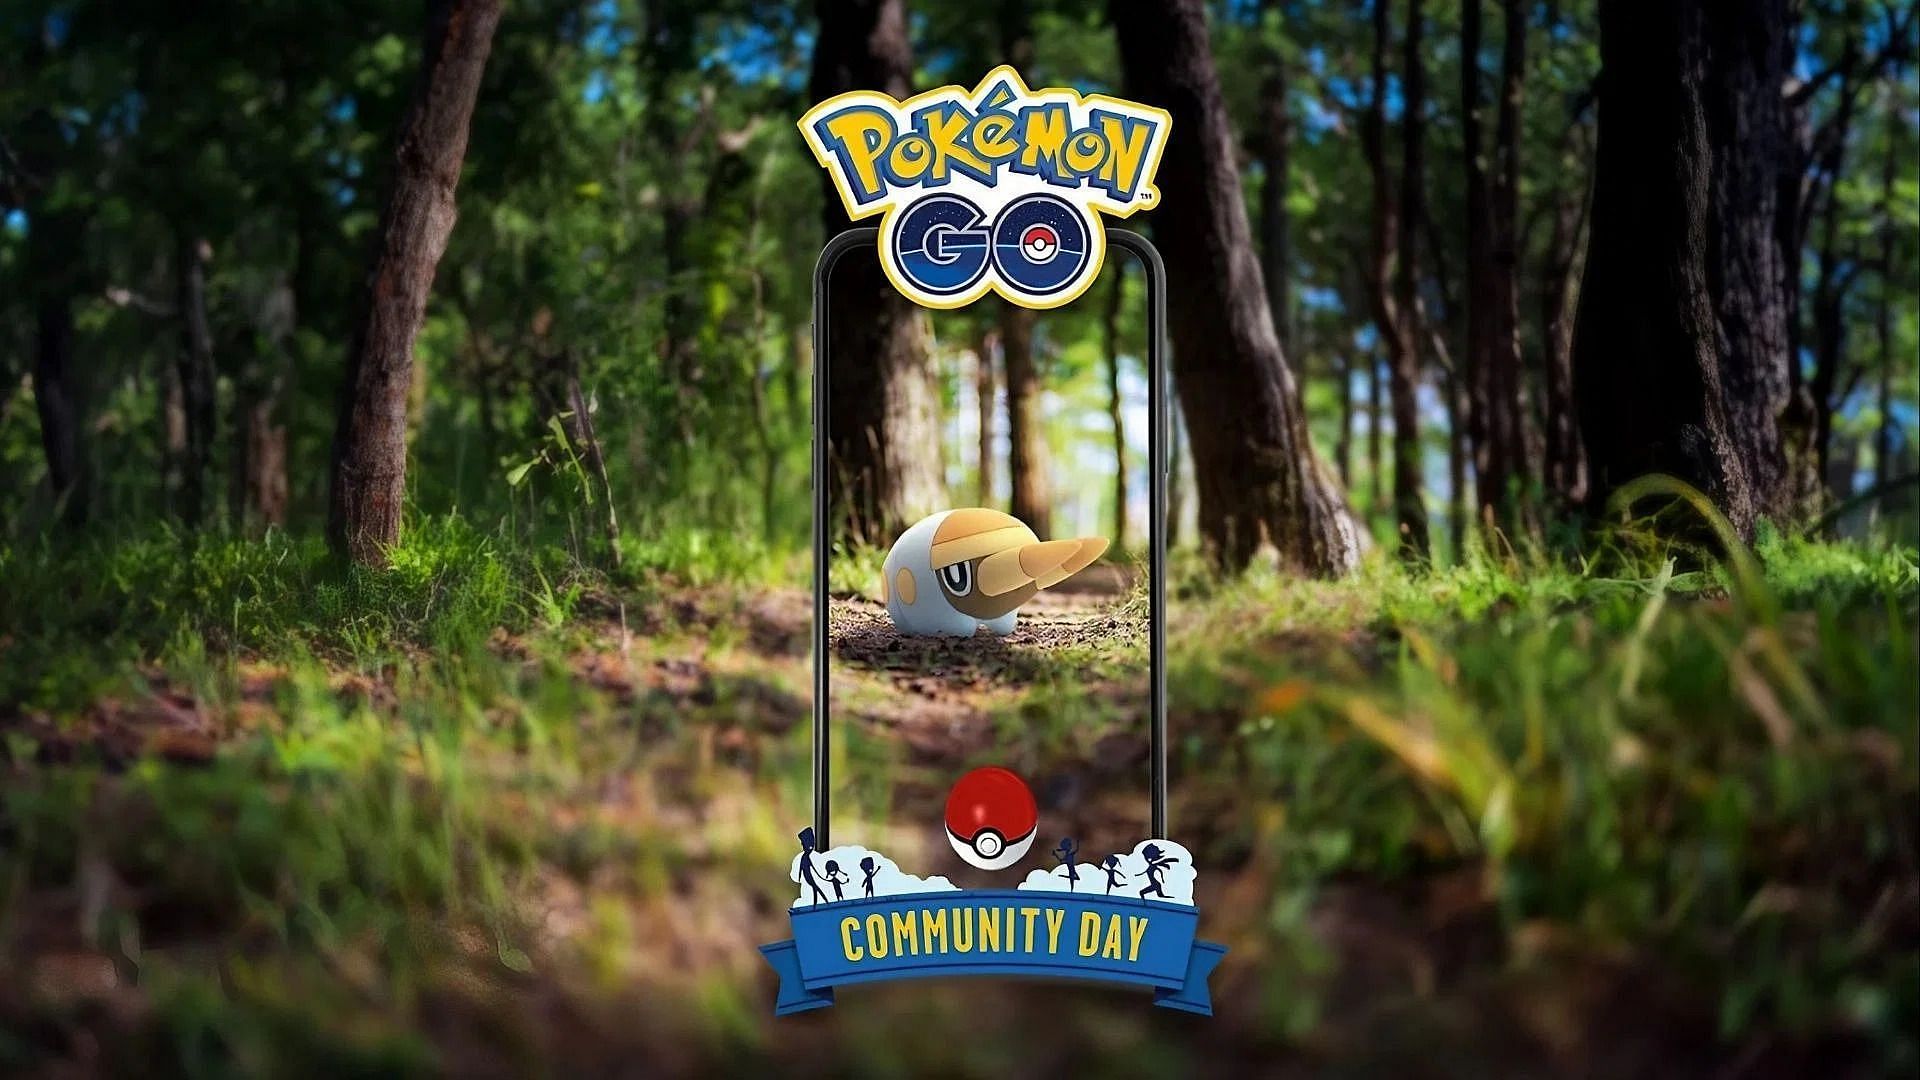 Digi Is Bringing An Exciting Experience To Pokémon GO Trainers Nationwide!